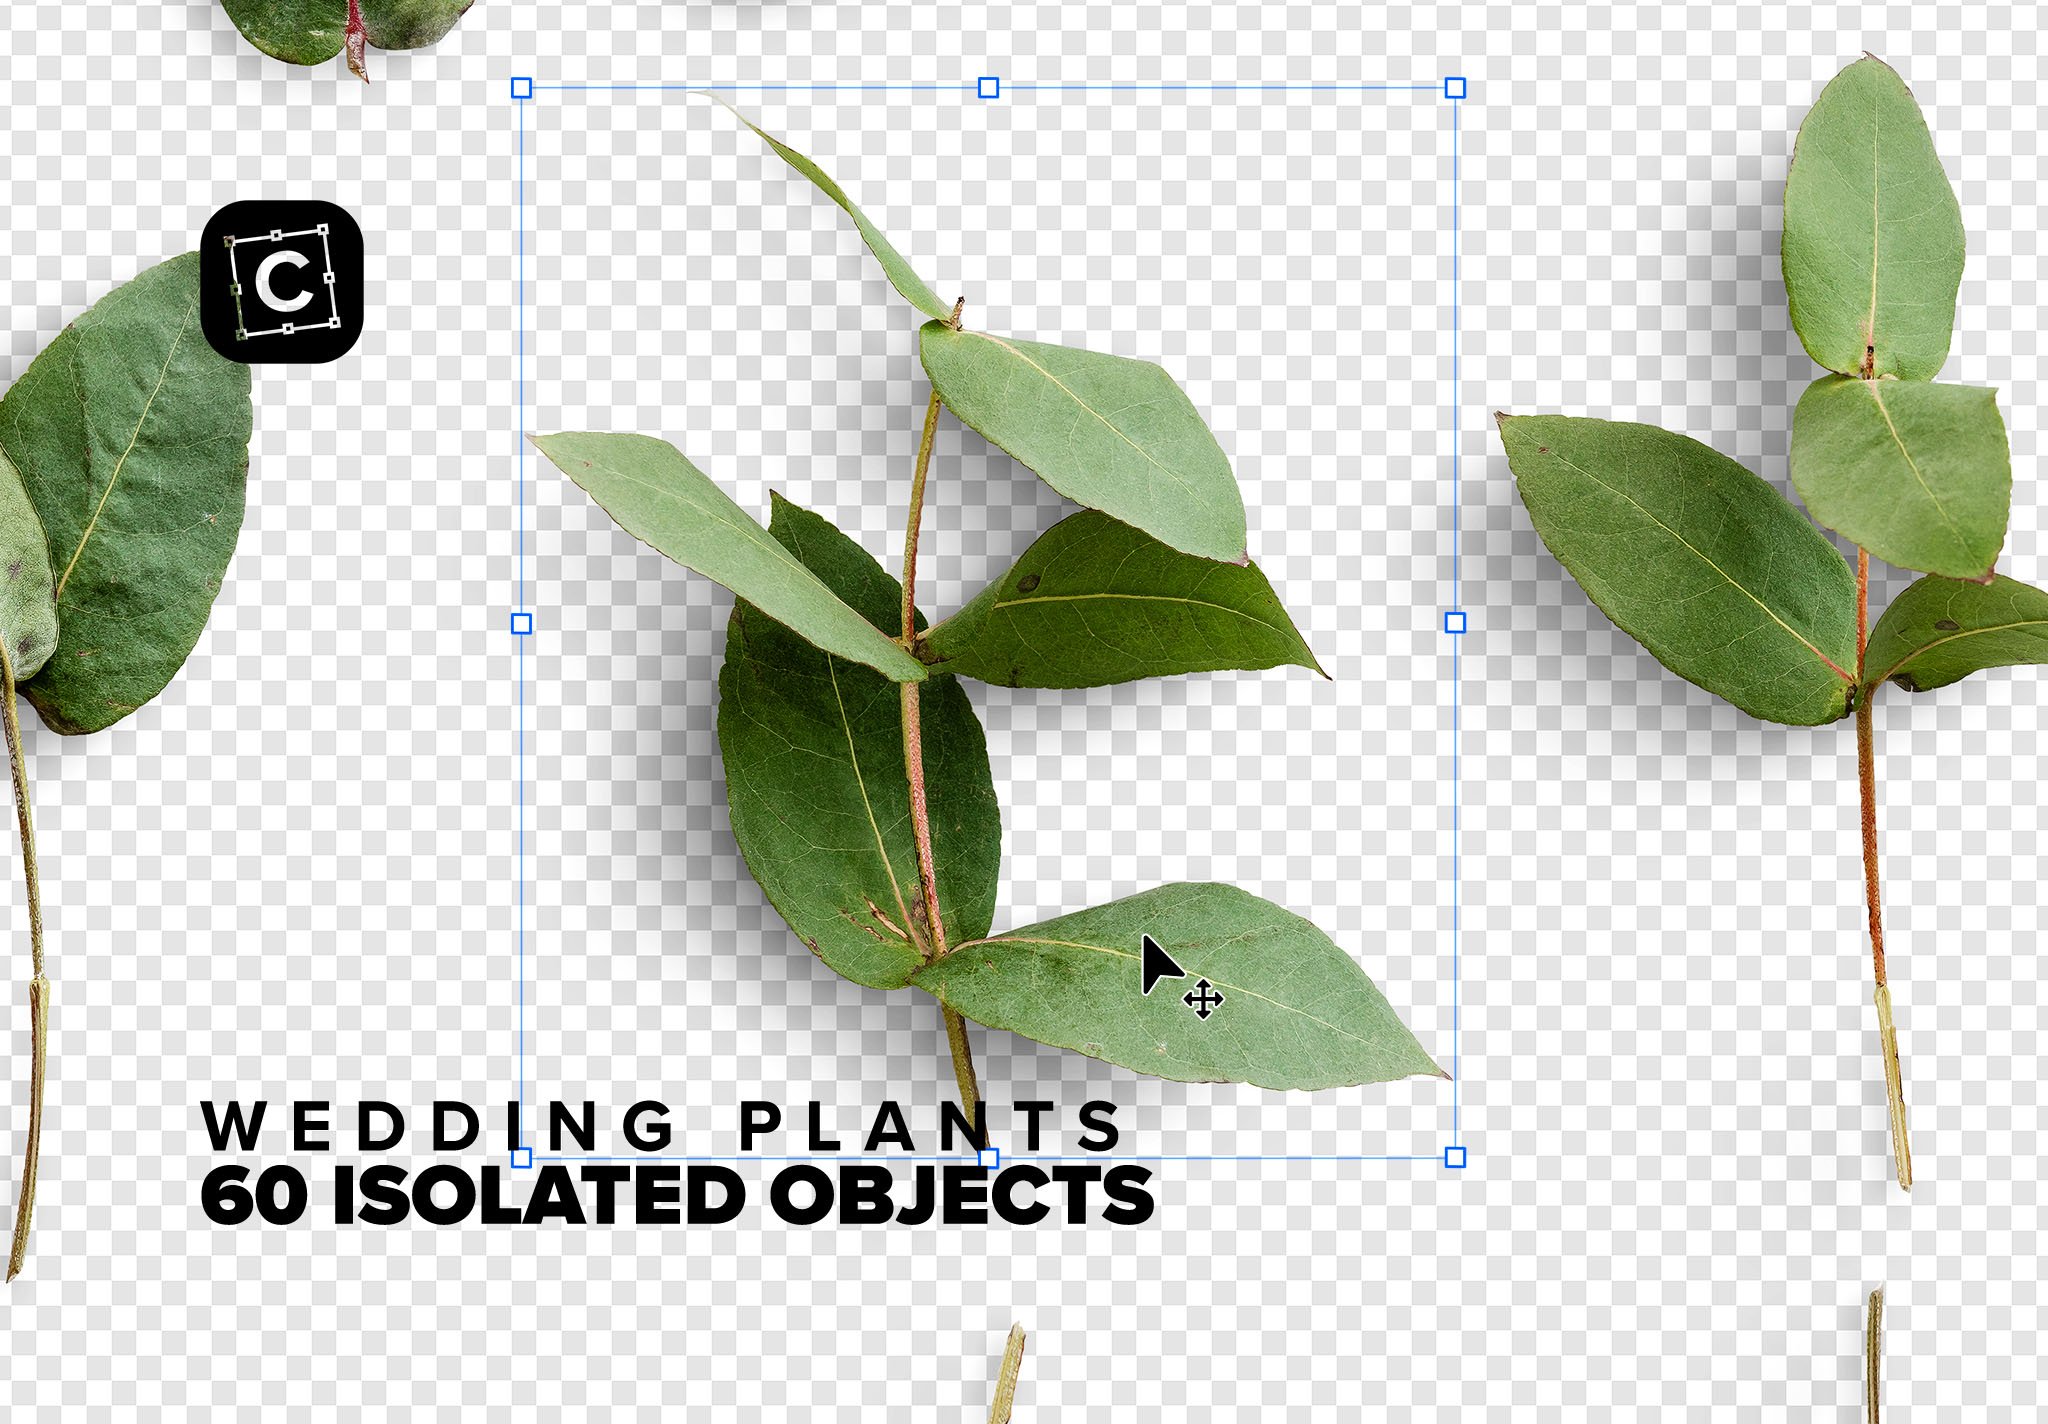 wedding plants 03 isolated objects 376